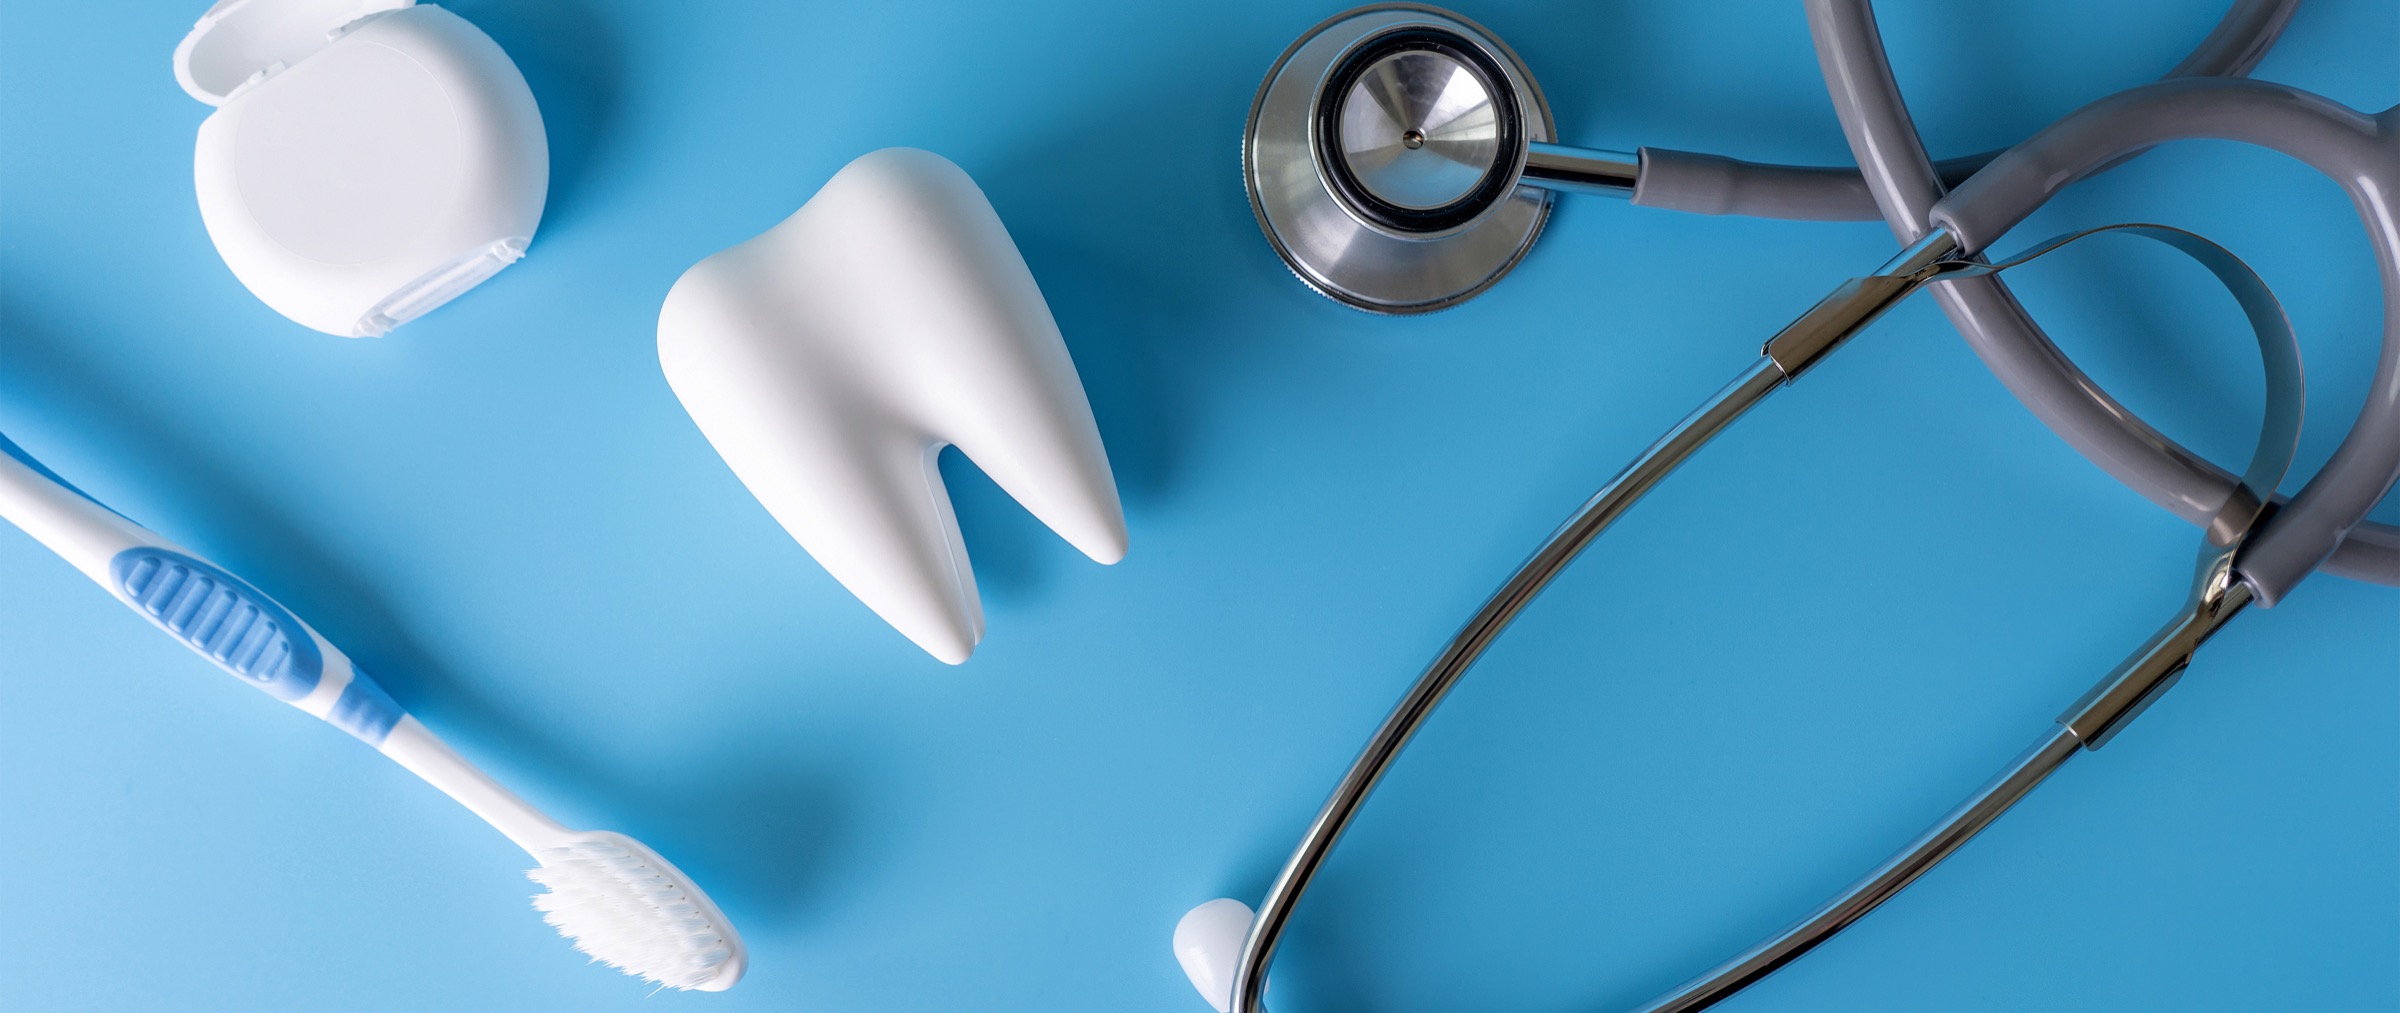 Dental equipment spread in front of a blue background